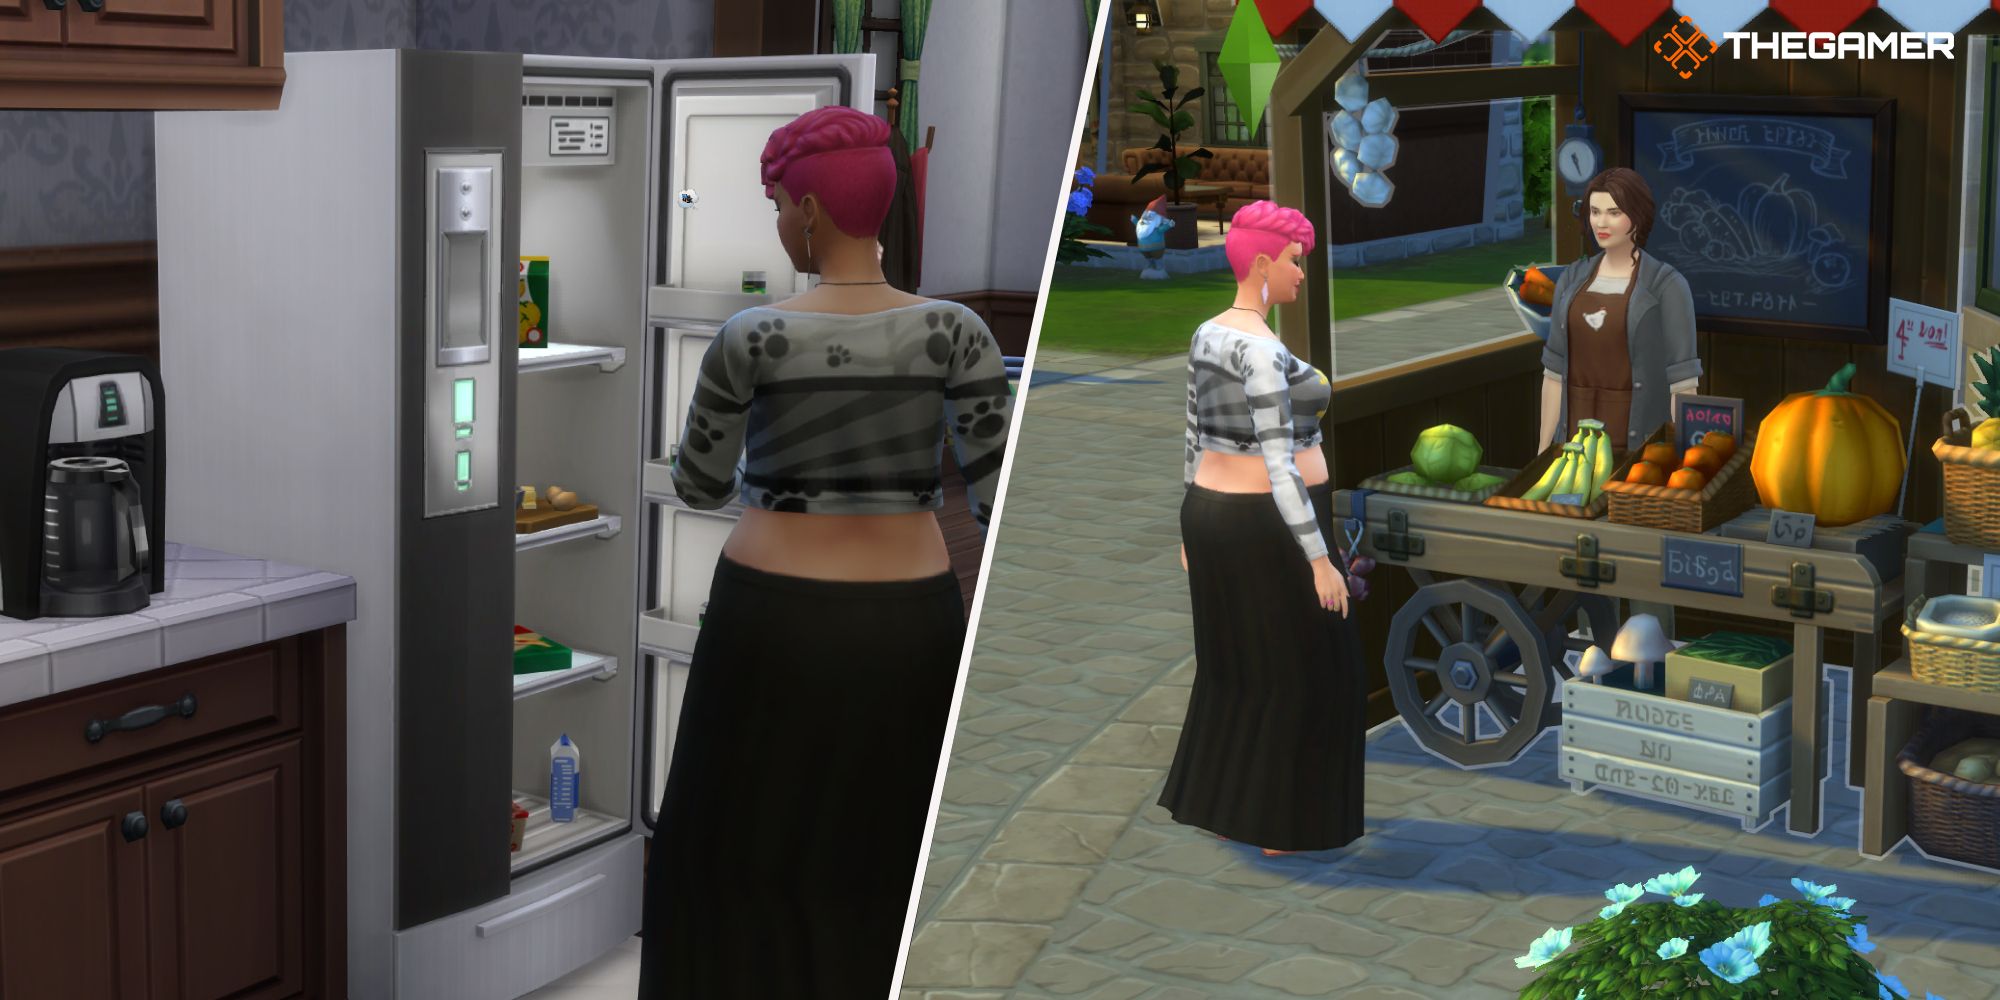 The Sims 4: Left: Sim opening fridge to get ingredients, right: Sim standing at produce stand